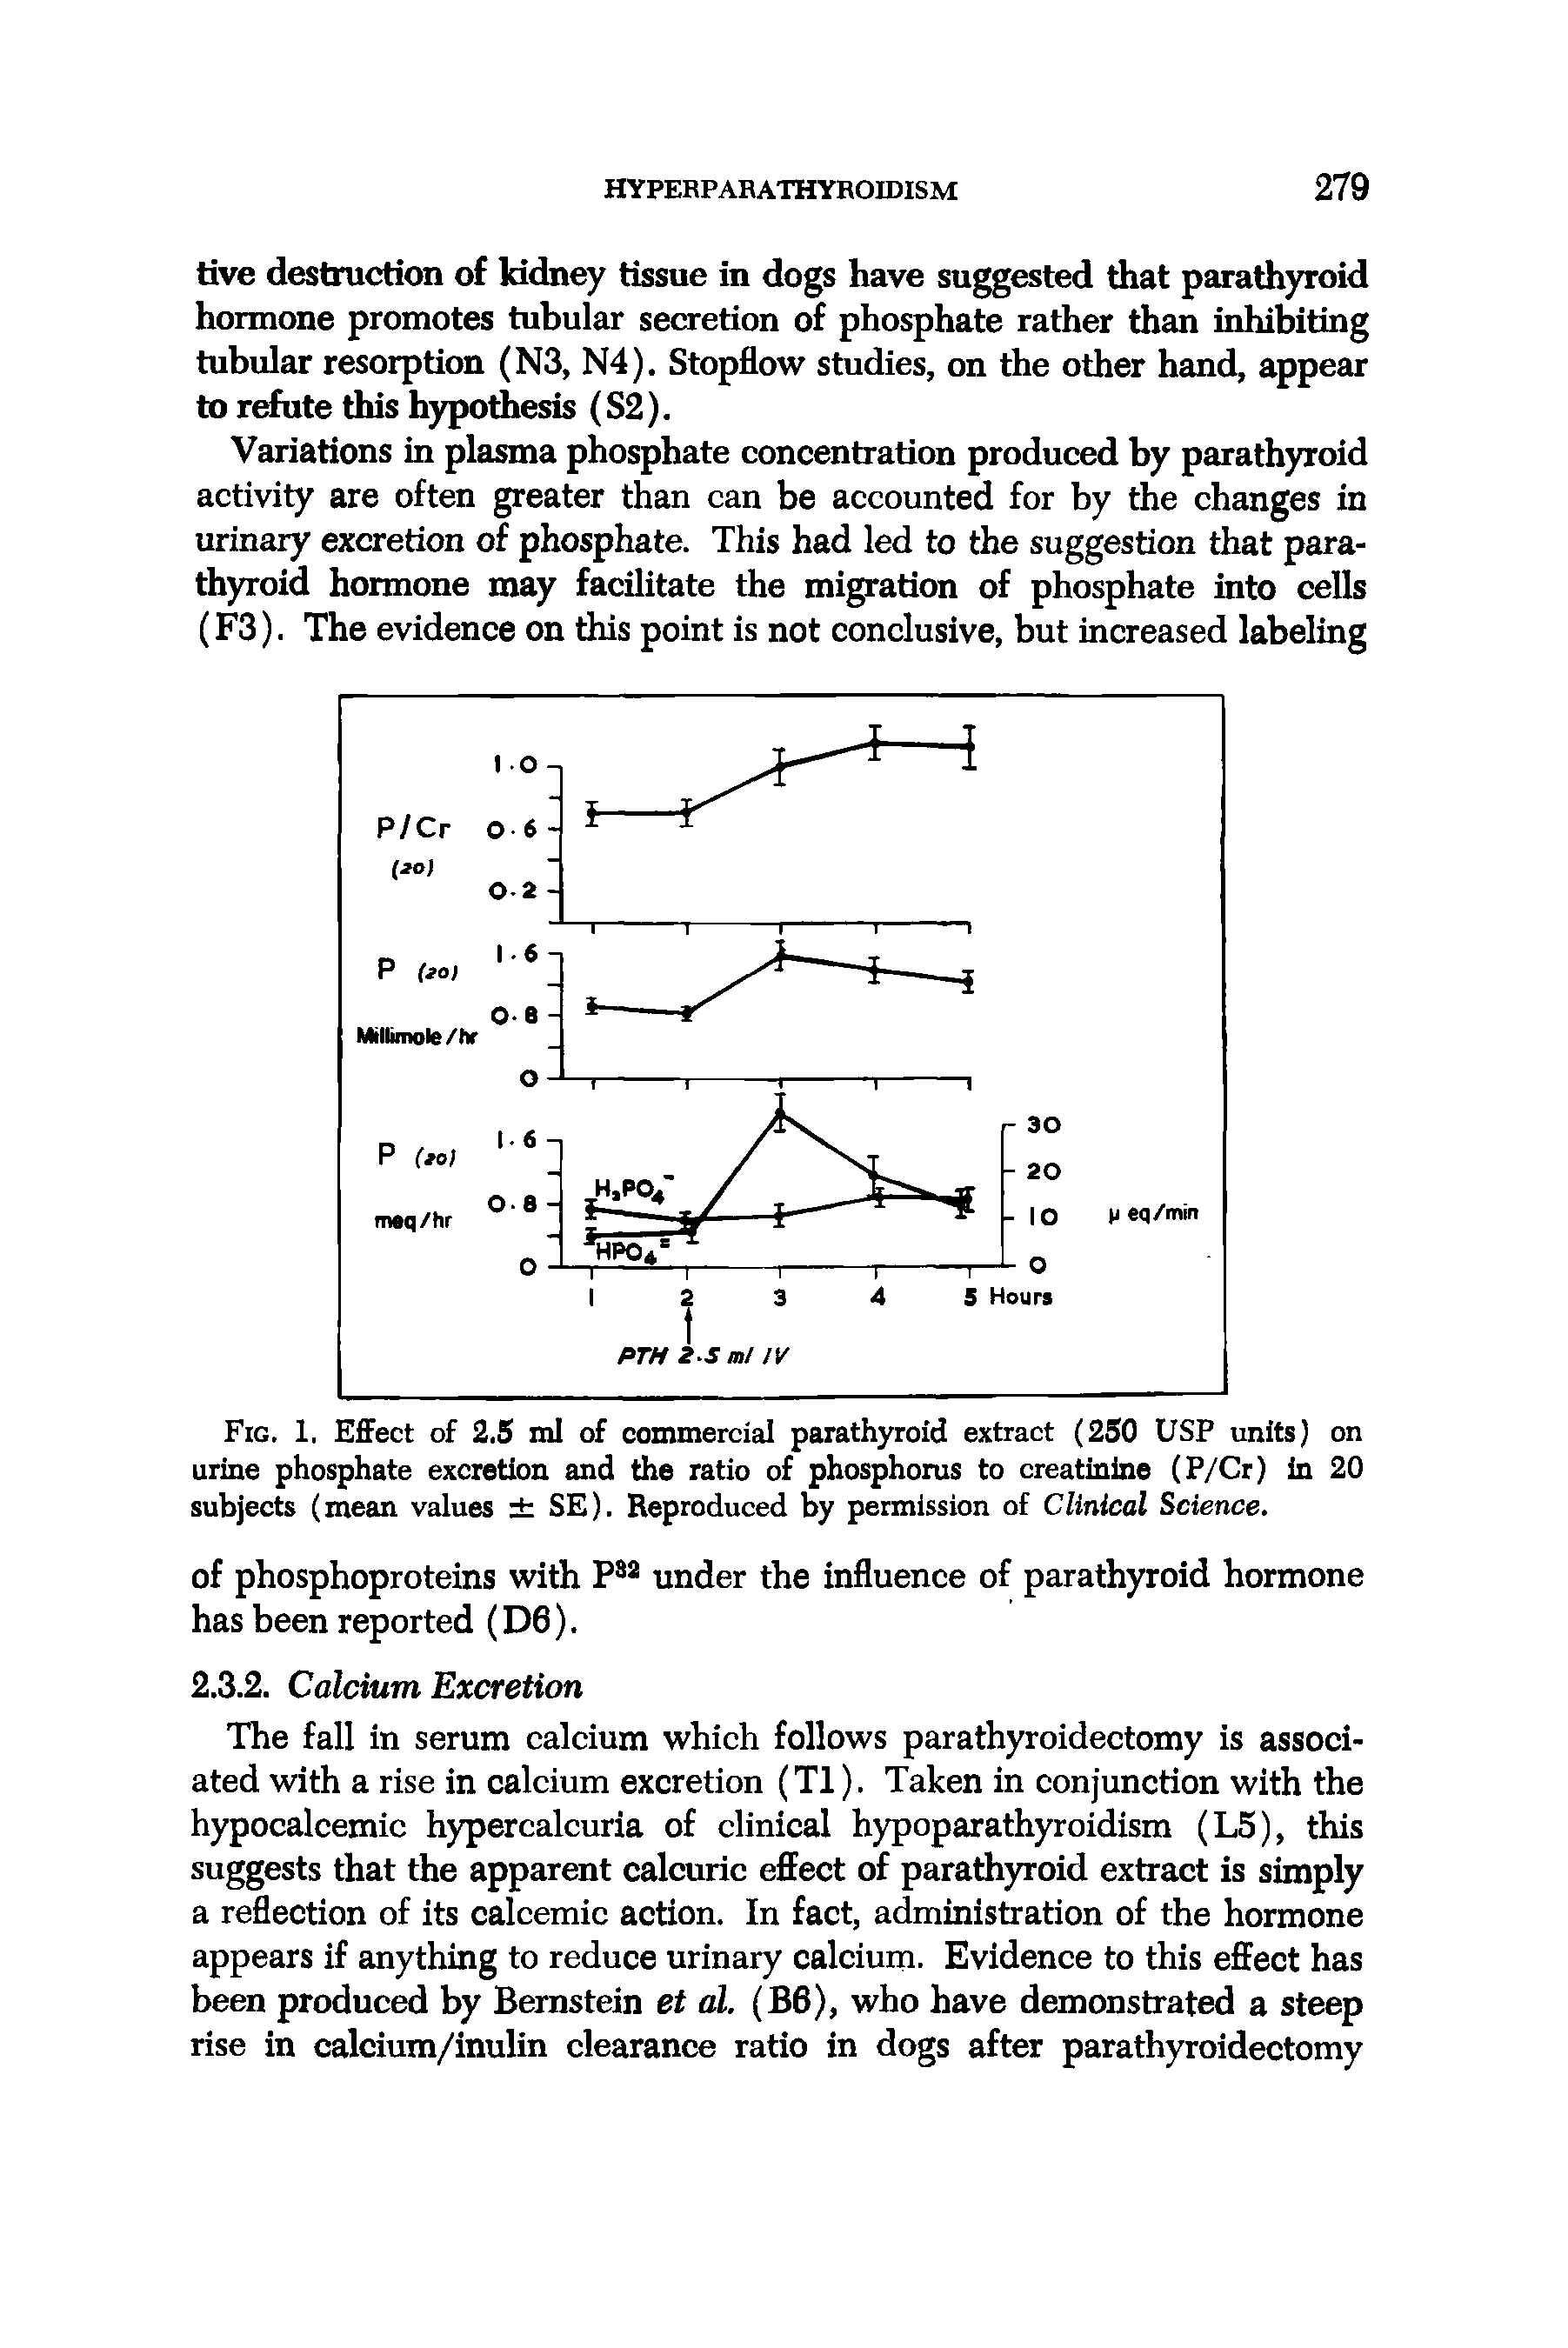 Fig. 1, EflFect of 2.5 ml of commercial parathyroid extract (250 USP units) on urine phosphate excretion and the ratio of phosphorus to creatinine (P/Cr) in 20 subjects (mean values SE). Reproduced by permission of Clinical Science.